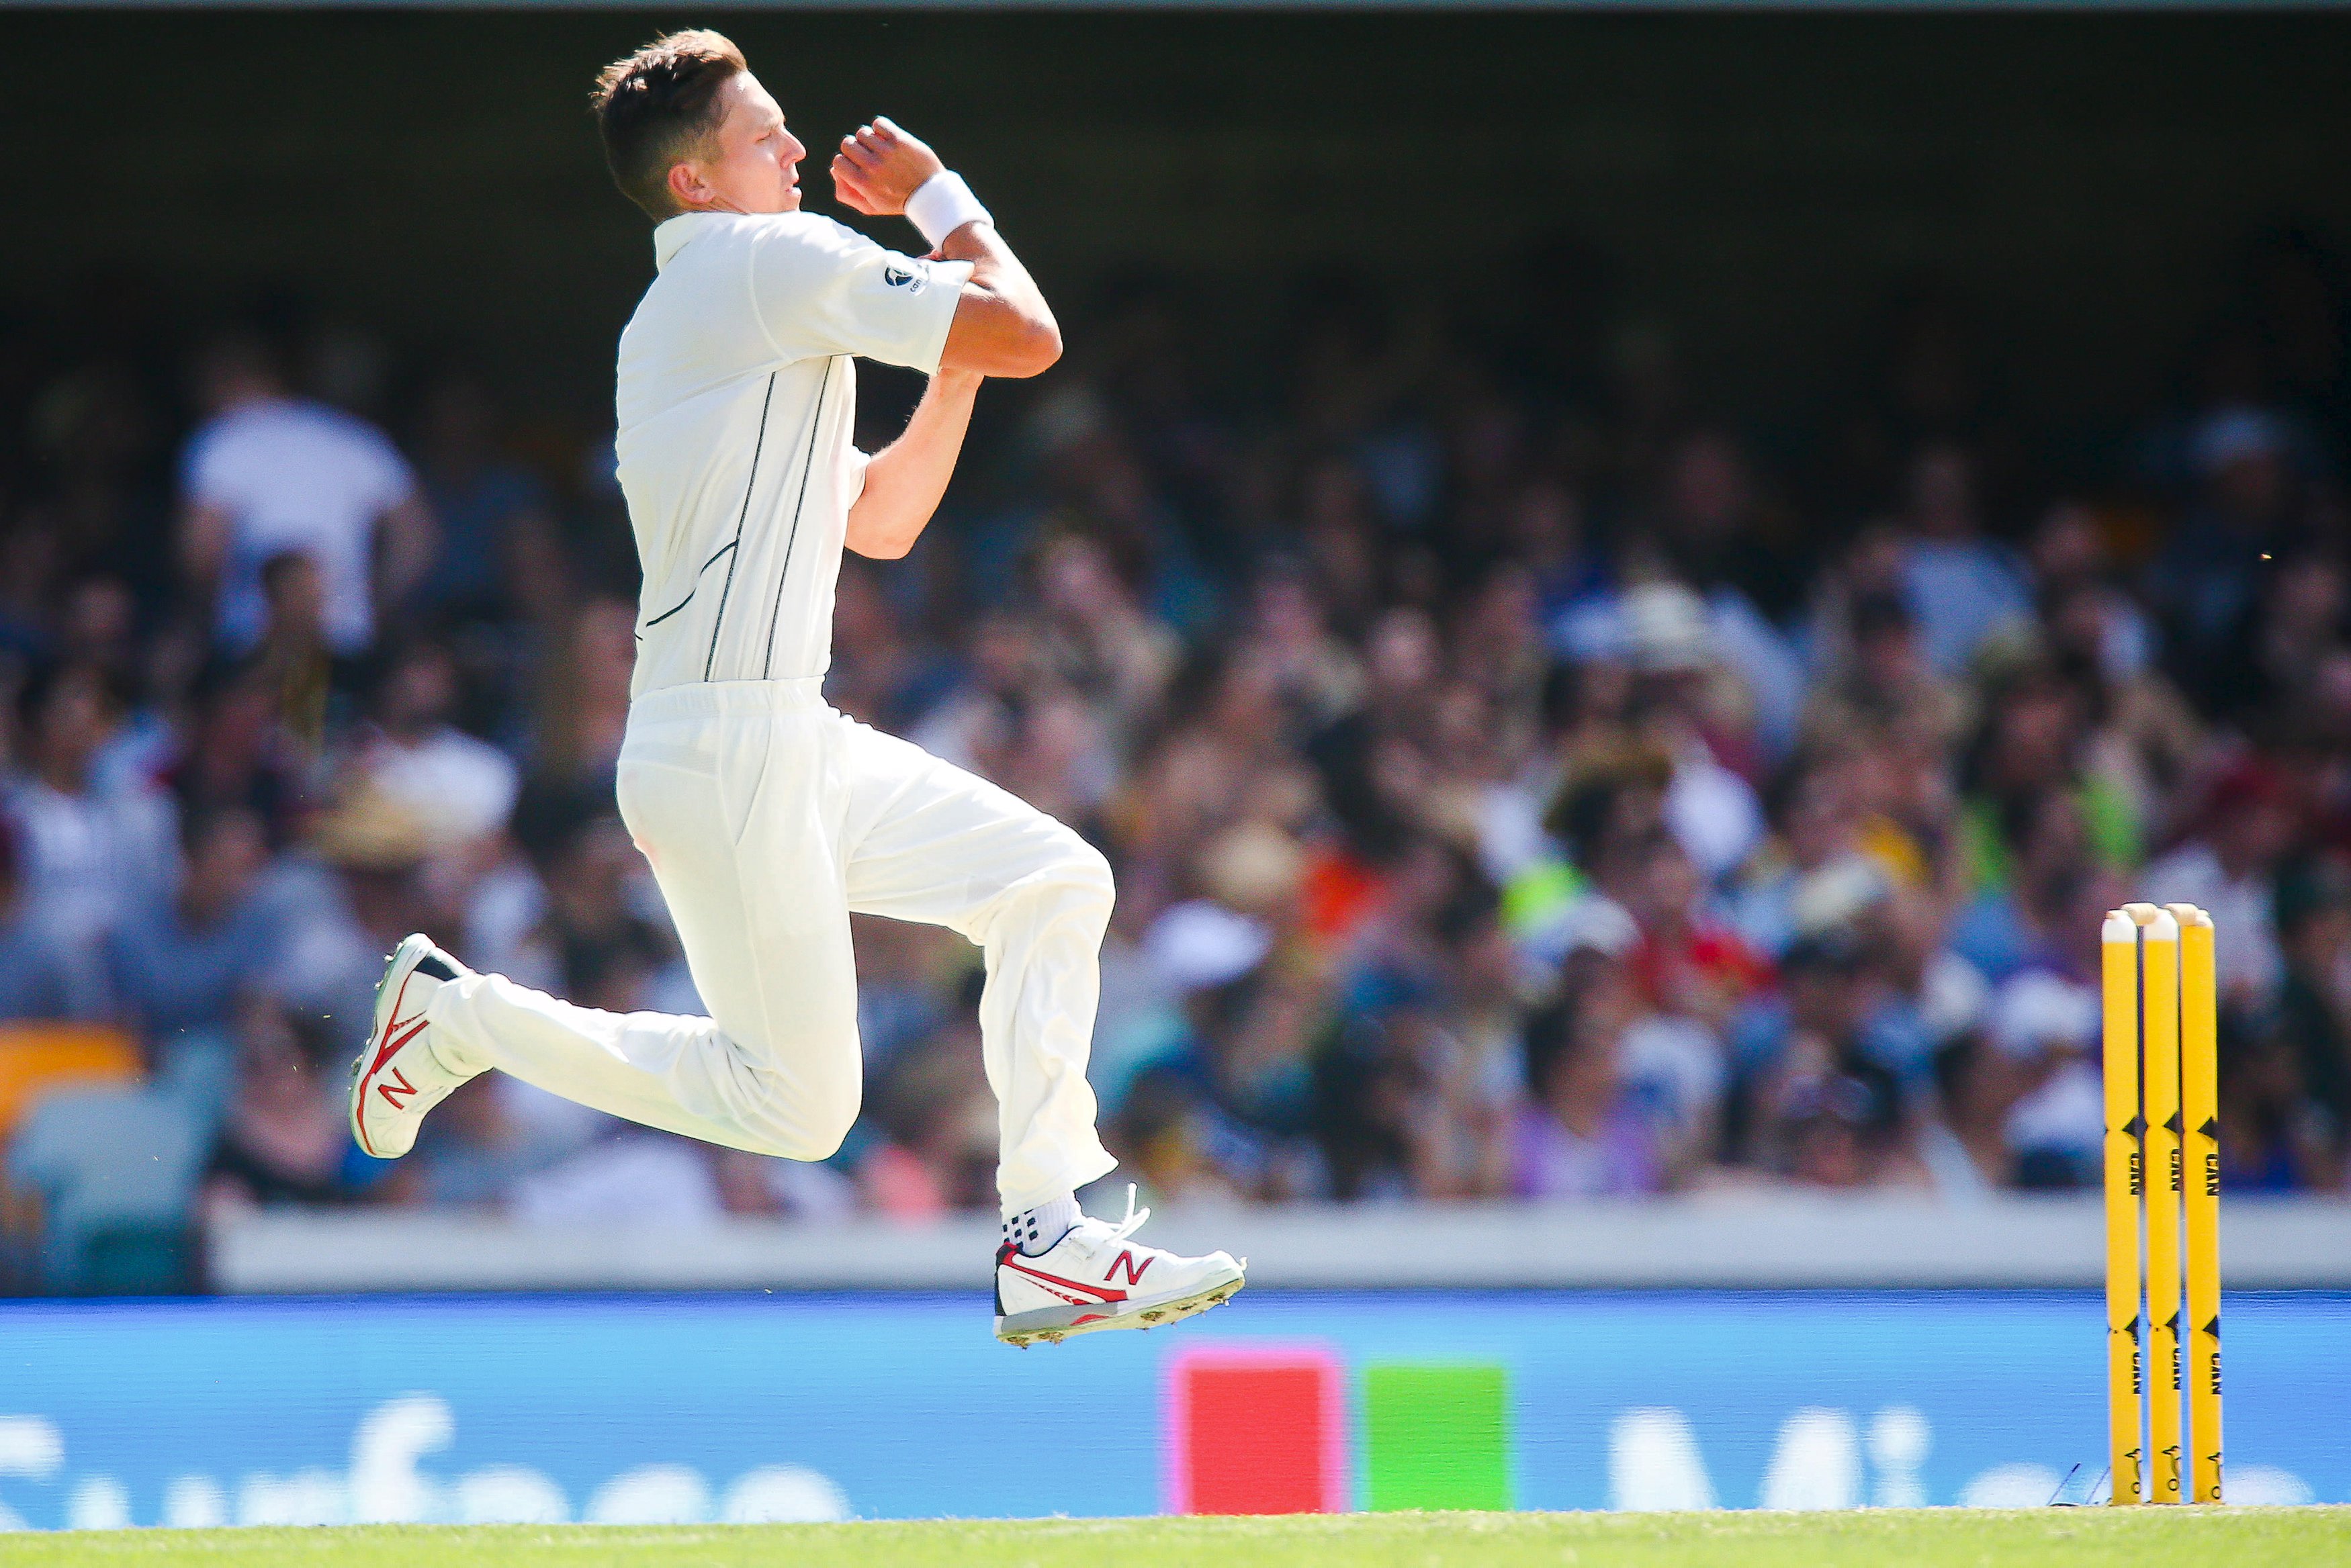 New Zealand bowler Trent Boult leaps during his bowling action, during the first cricket test match between Australia and New Zealand in Brisbane November 7, 2015. Photo: Reuters